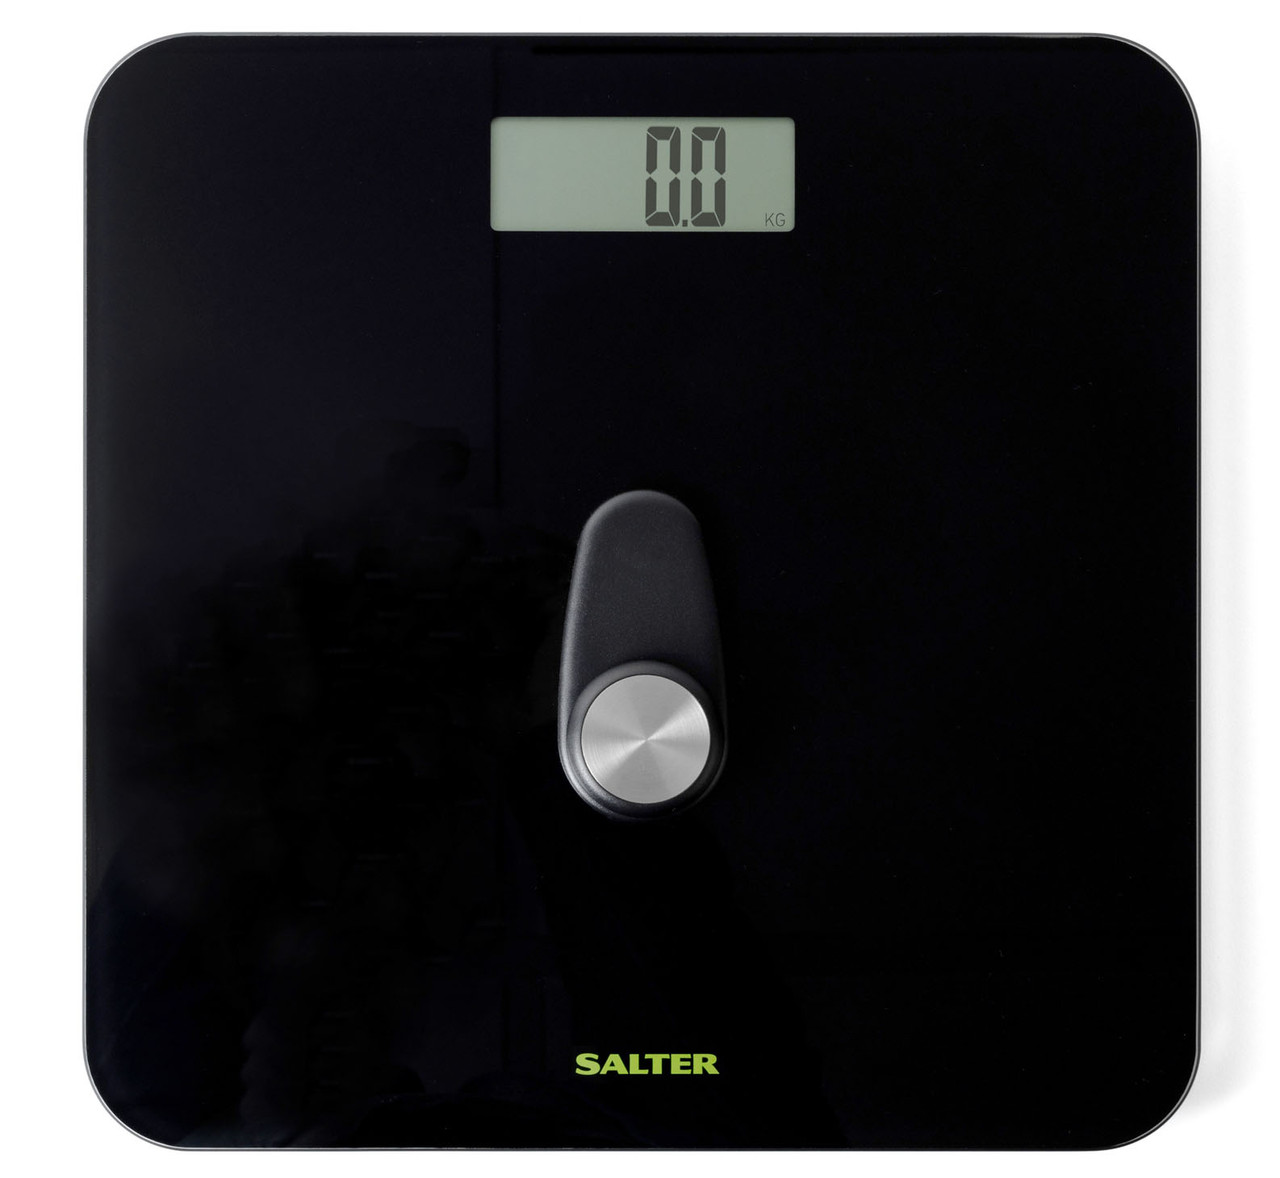 Max Life - Digital Scale, Body Weight Bathroom Scale 396lb/180kg High Accuracy, Step-On Technology with Lithium Rechargeable Battery - Black, New